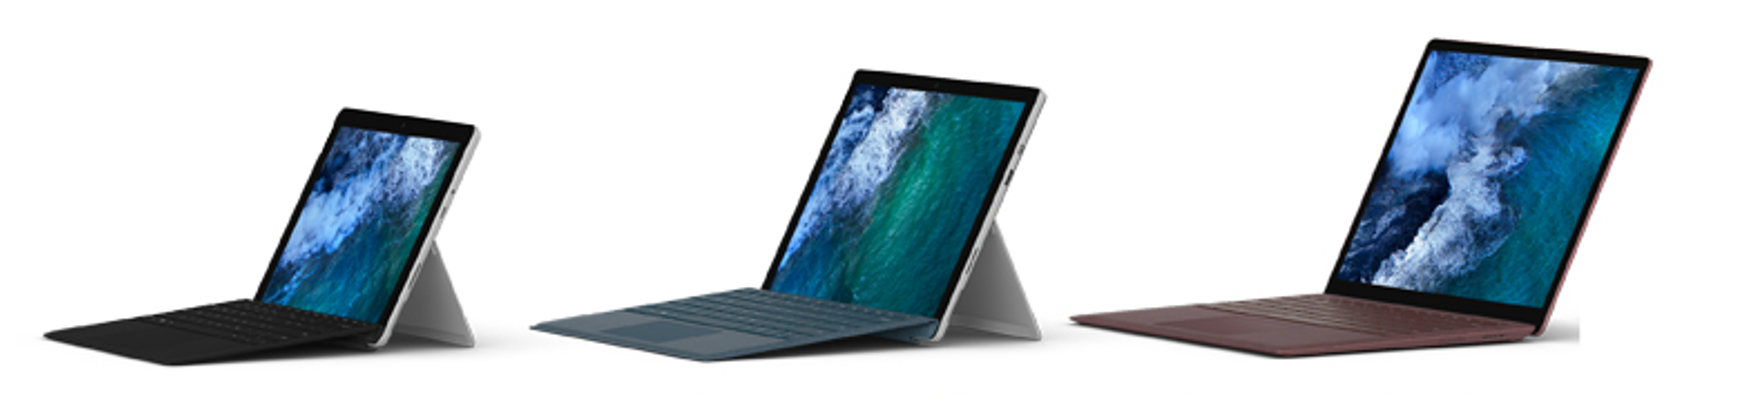 Photograph of Microsoft Surface devices.